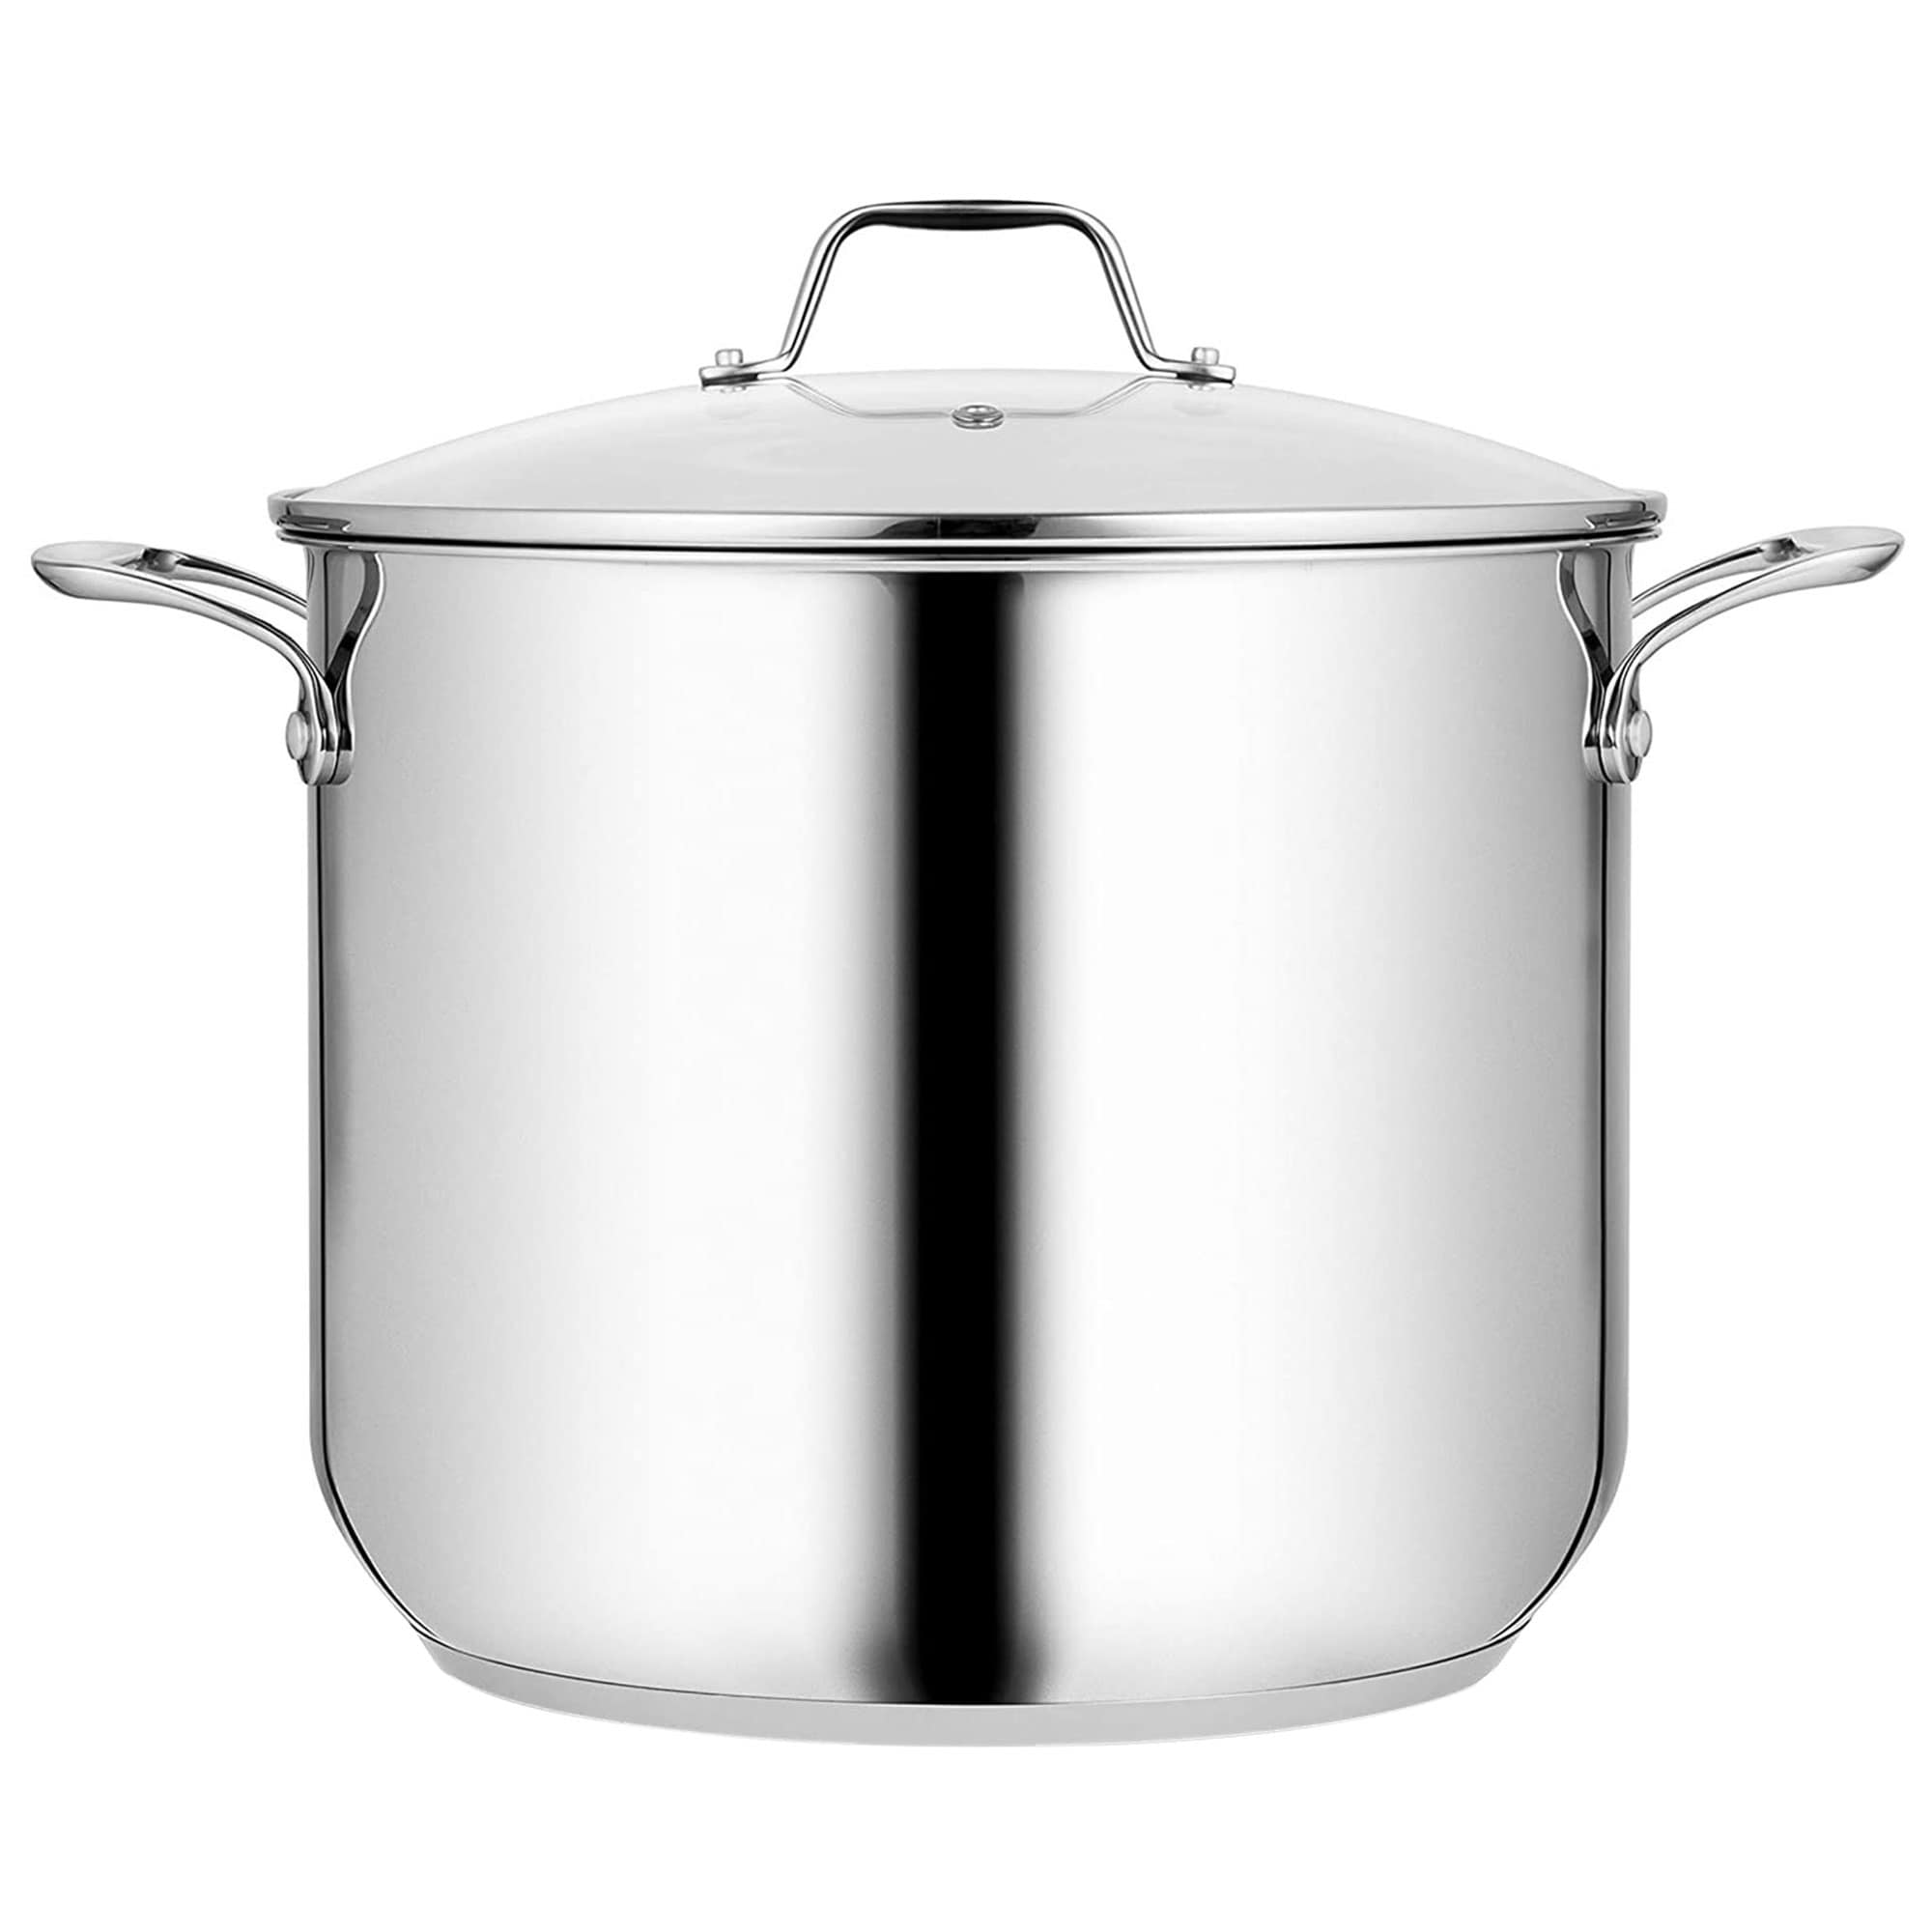 https://ak1.ostkcdn.com/images/products/is/images/direct/bc3c671813e7e489d0db18d72d55e1ed8aef0a37/NutriChef-Heavy-Duty-19-Quart-Stainless-Steel-Soup-Stock-Pot-with-Lid.jpg